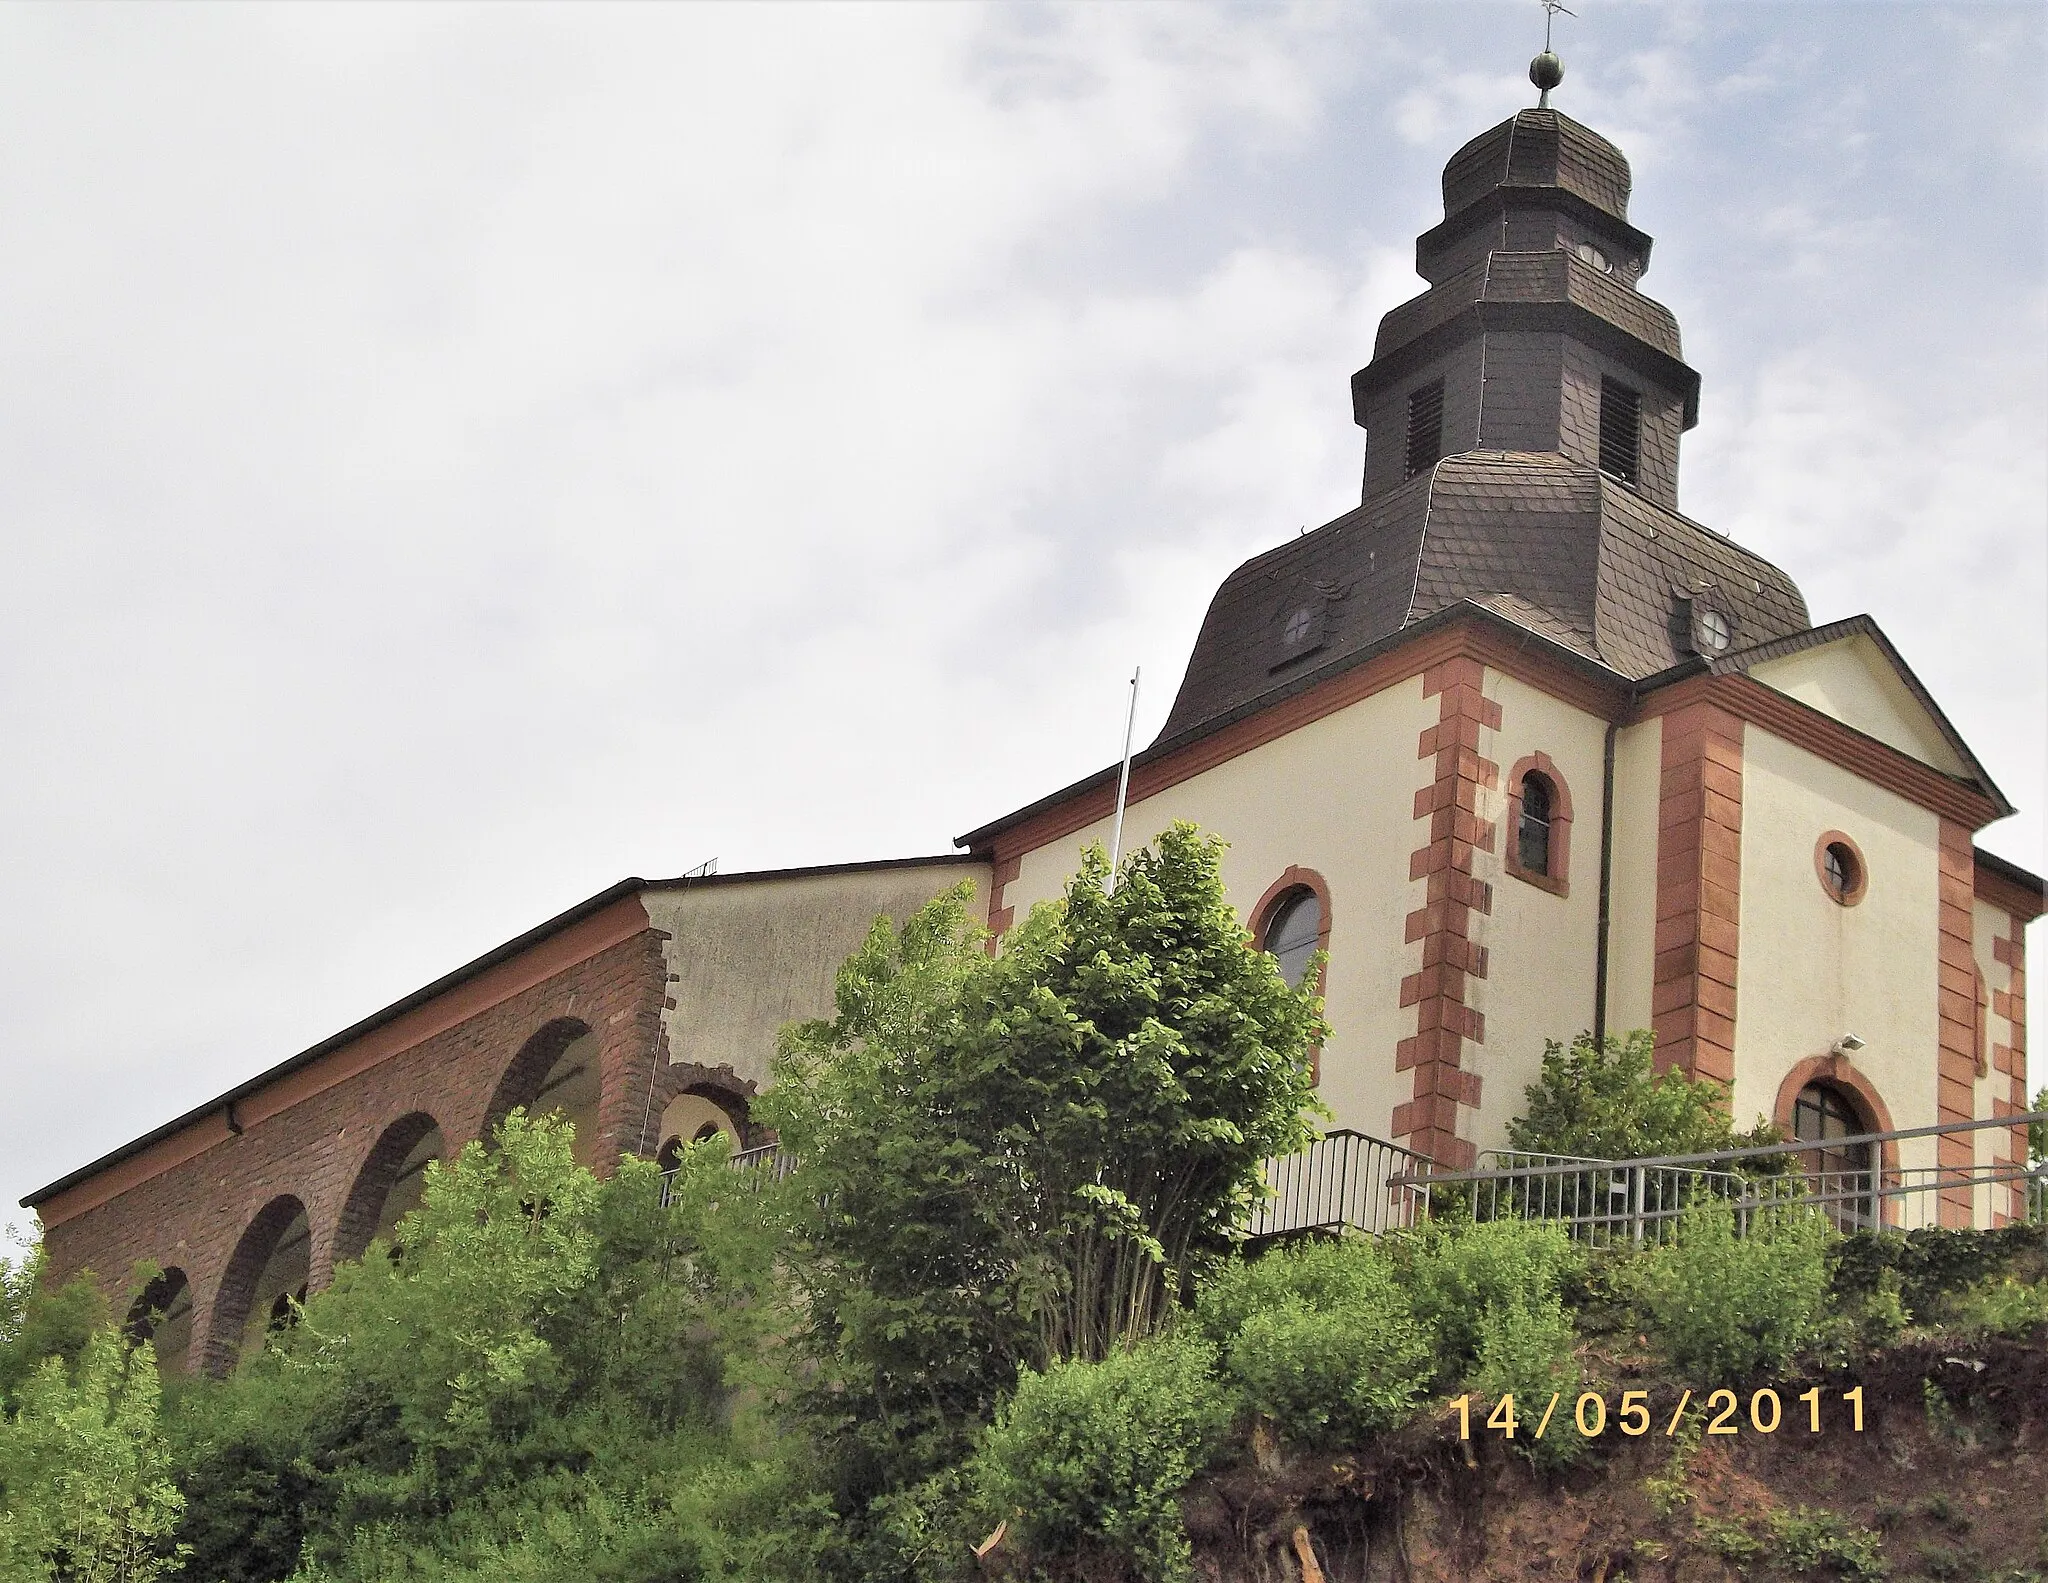 Photo showing: Exterior of the roman catholic church in Bardenbach, Saarland